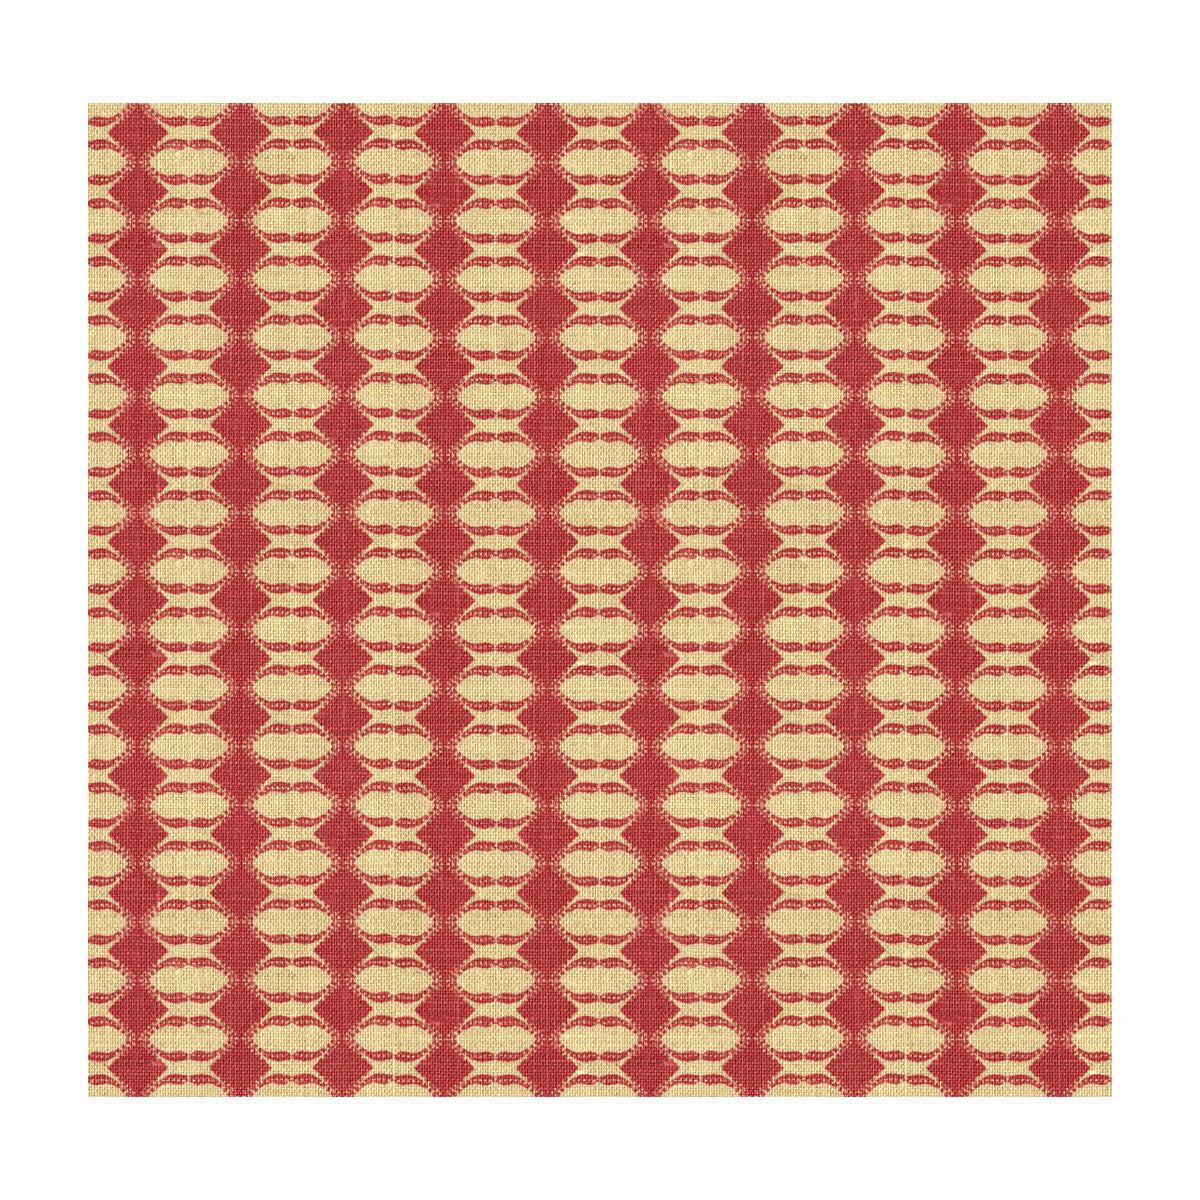 Diamond fabric in cerise color - pattern GWF-3507.7.0 - by Lee Jofa Modern in the Allegra Hicks Garden collection